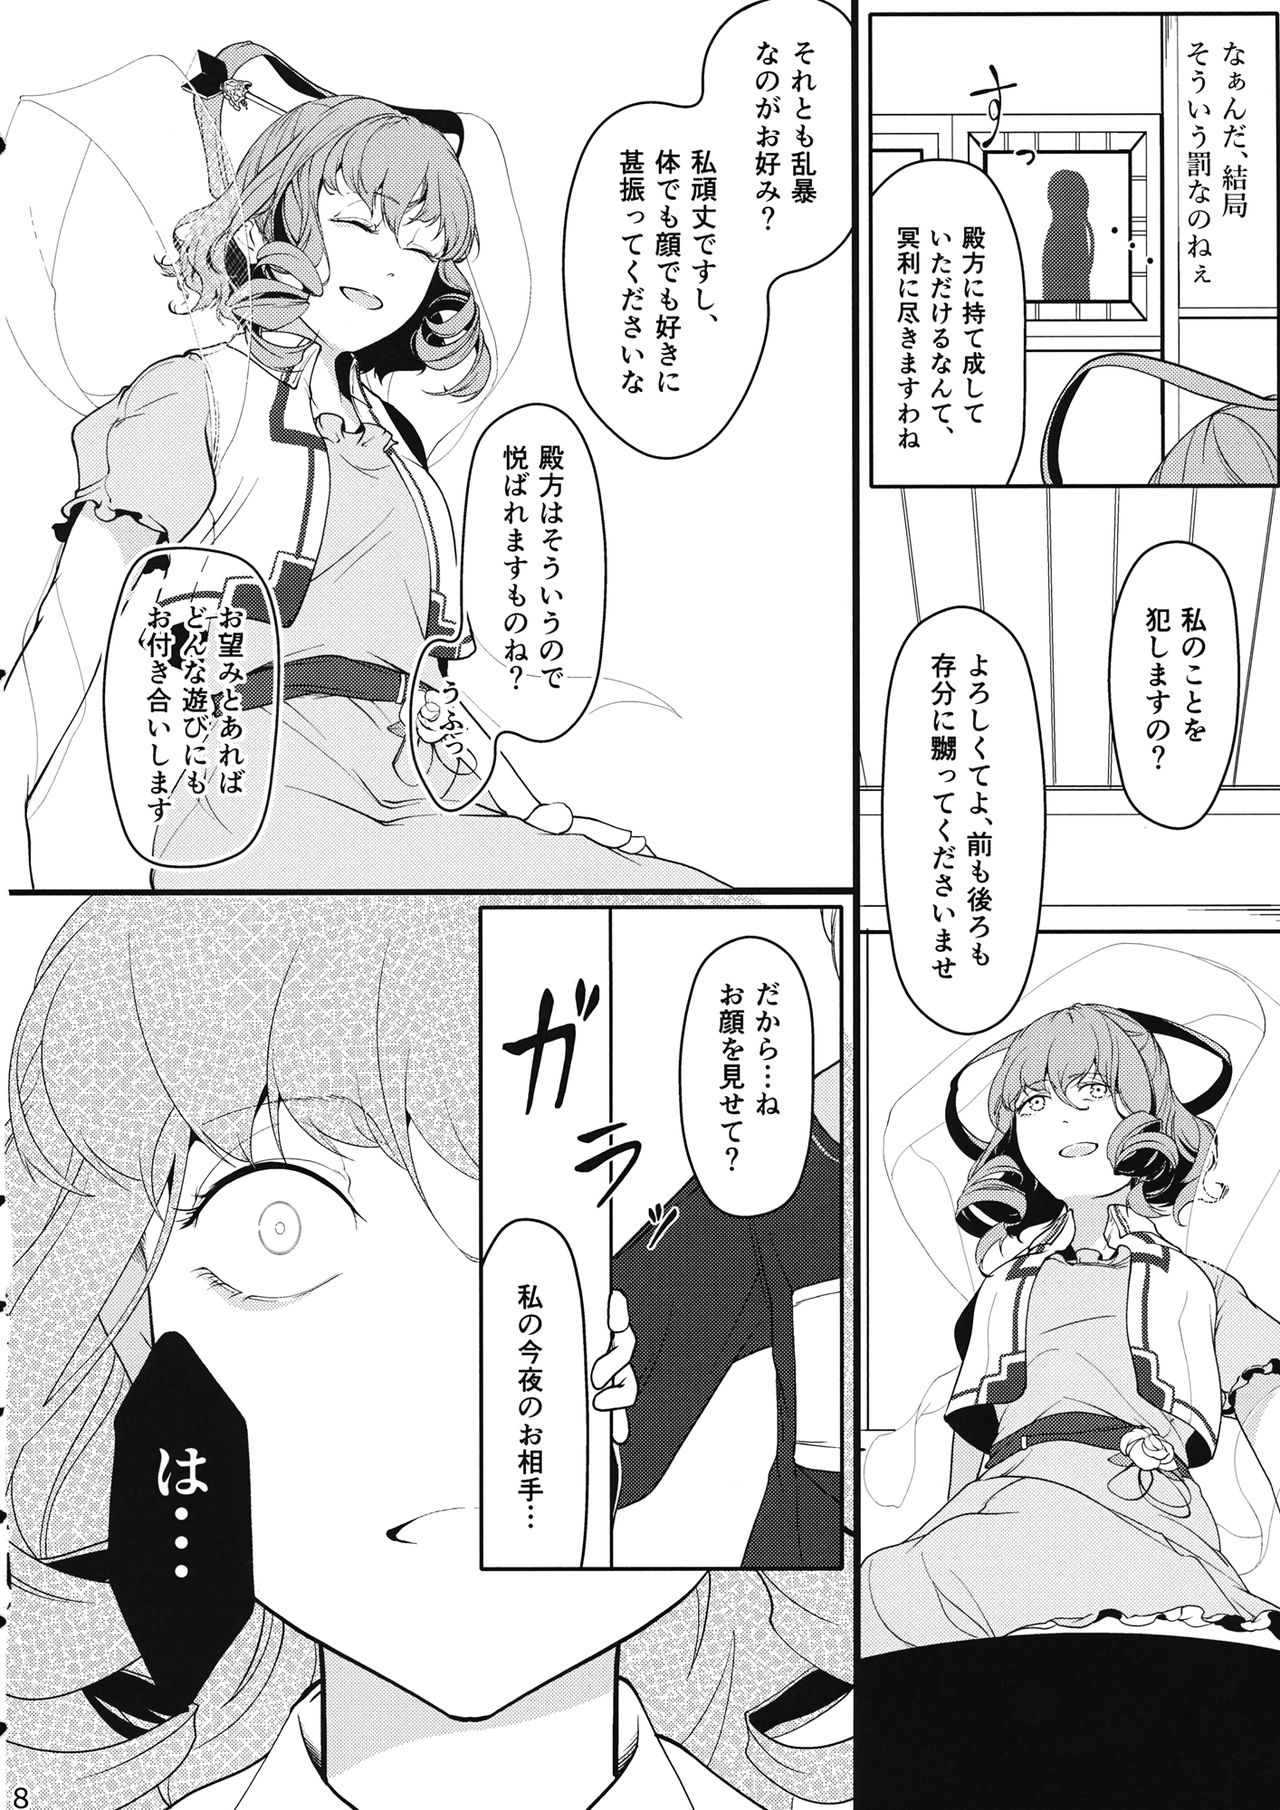 (C97) [Flying Bear (Hiyou)] Reverse Damage (Touhou Project) page 7 full